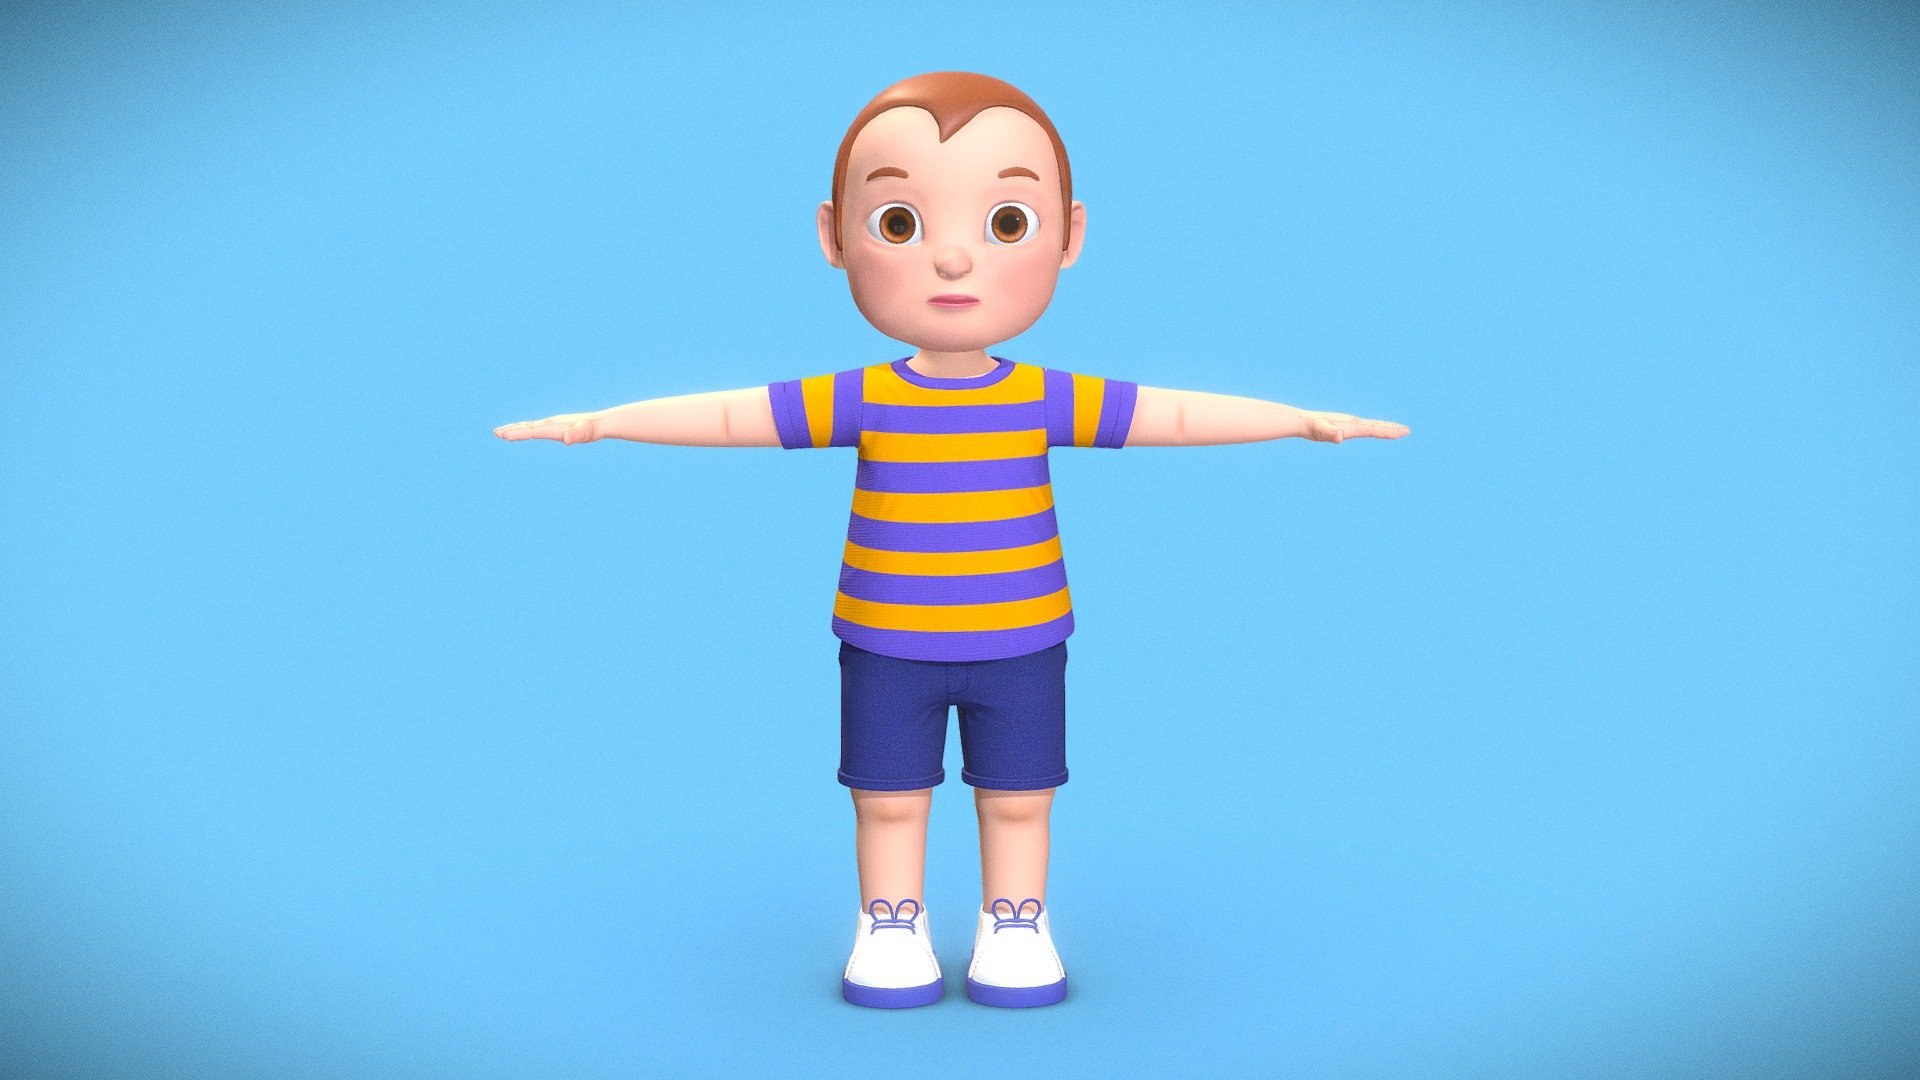 3d character modelling of boy. You can use it directly for any type animation. It is created in 3ds max, Maya and substance painter. Boy character we designed to be suitable for games, cartoon, rhymes or any other project.

The model is packed with high resolution pbr textures, ready to be used in modern games or film projects. Additional custom sail poses or higher resolution textures available on demand, reach out to me for more information on that 3d model